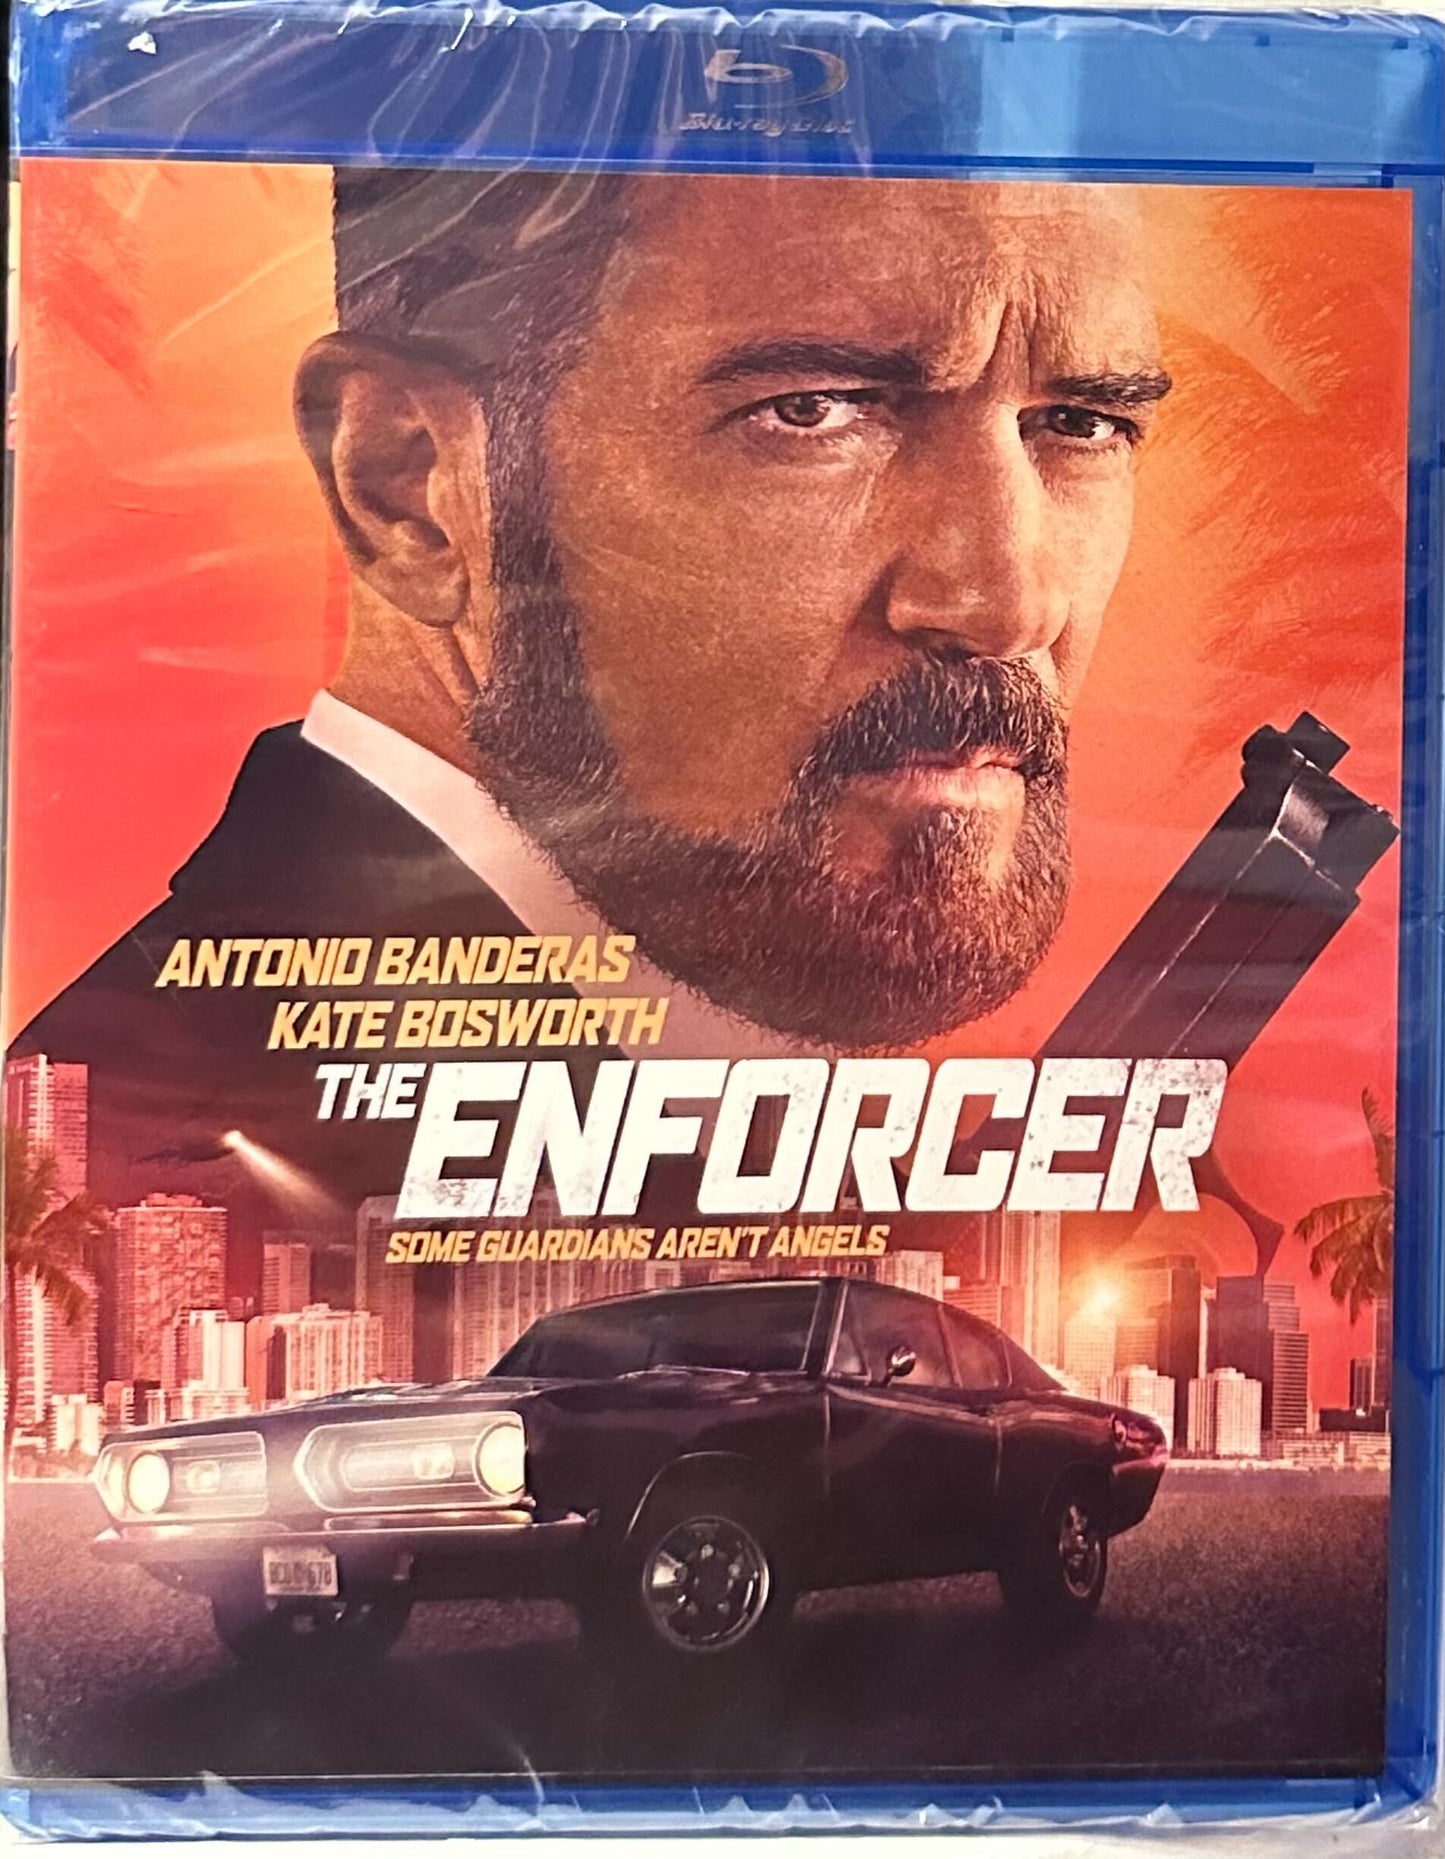 The Enforcer Blu-ray